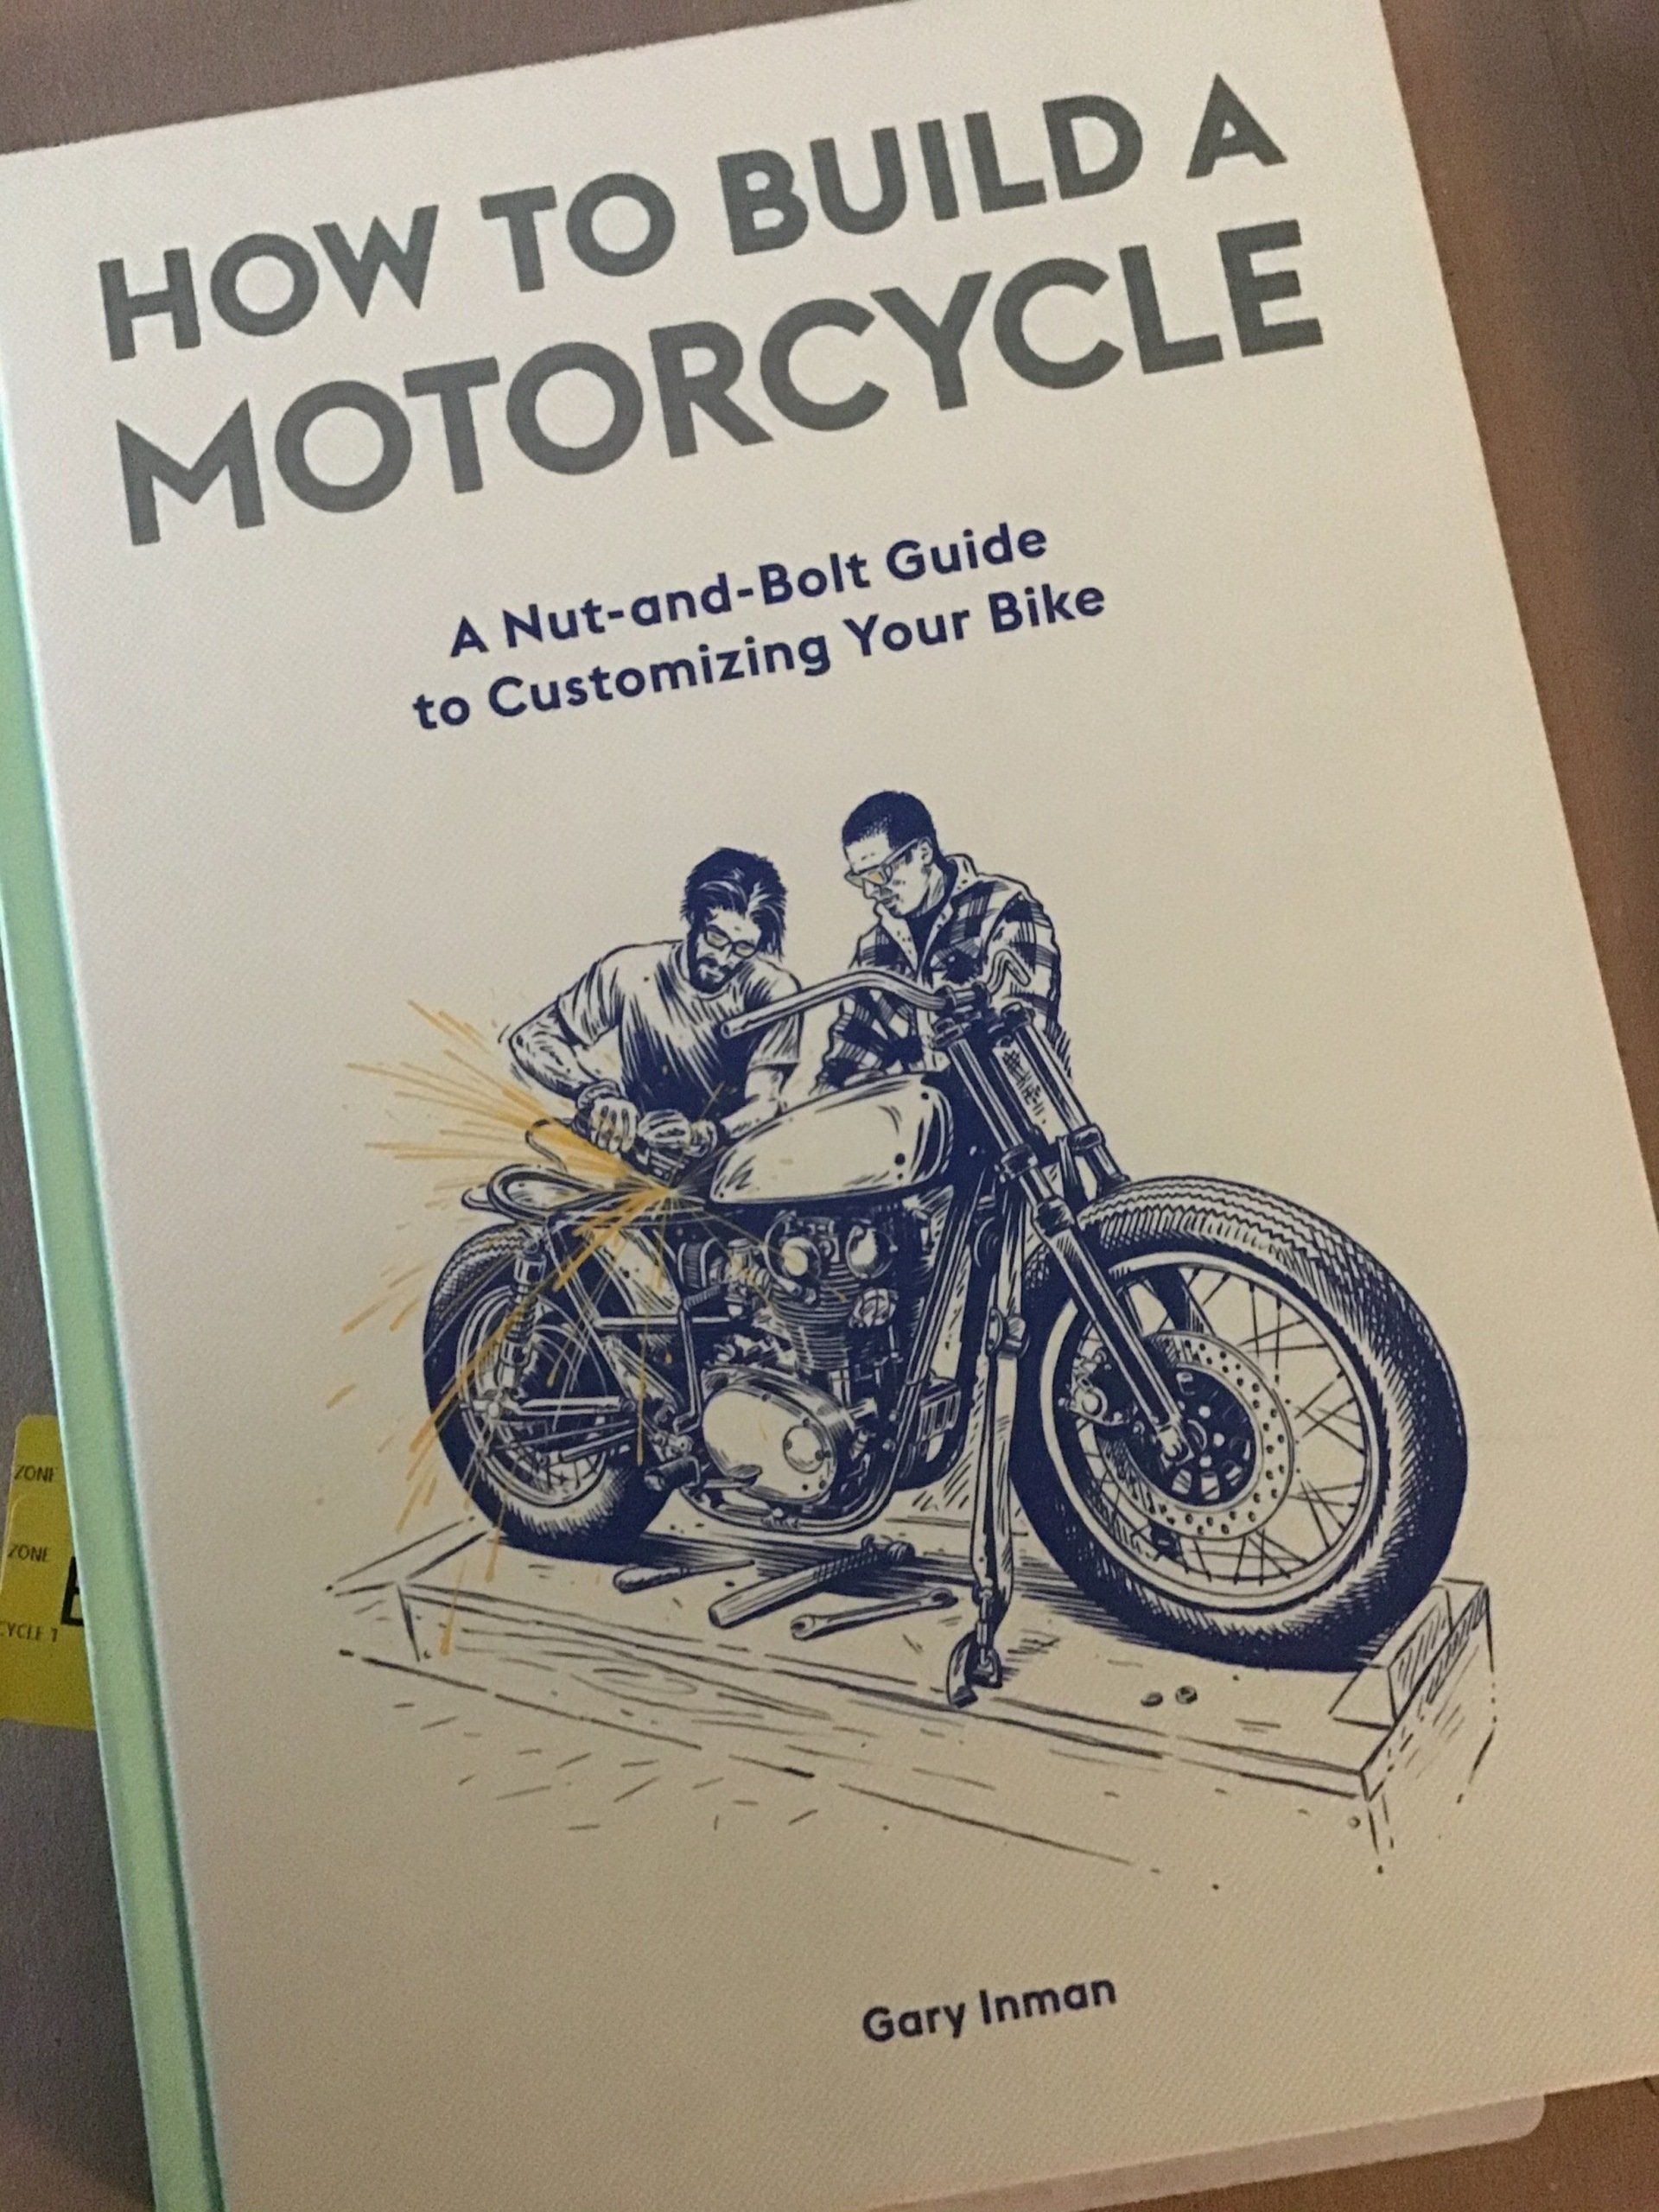 How To Build A Motorcycle - Gary Inman - Book Review